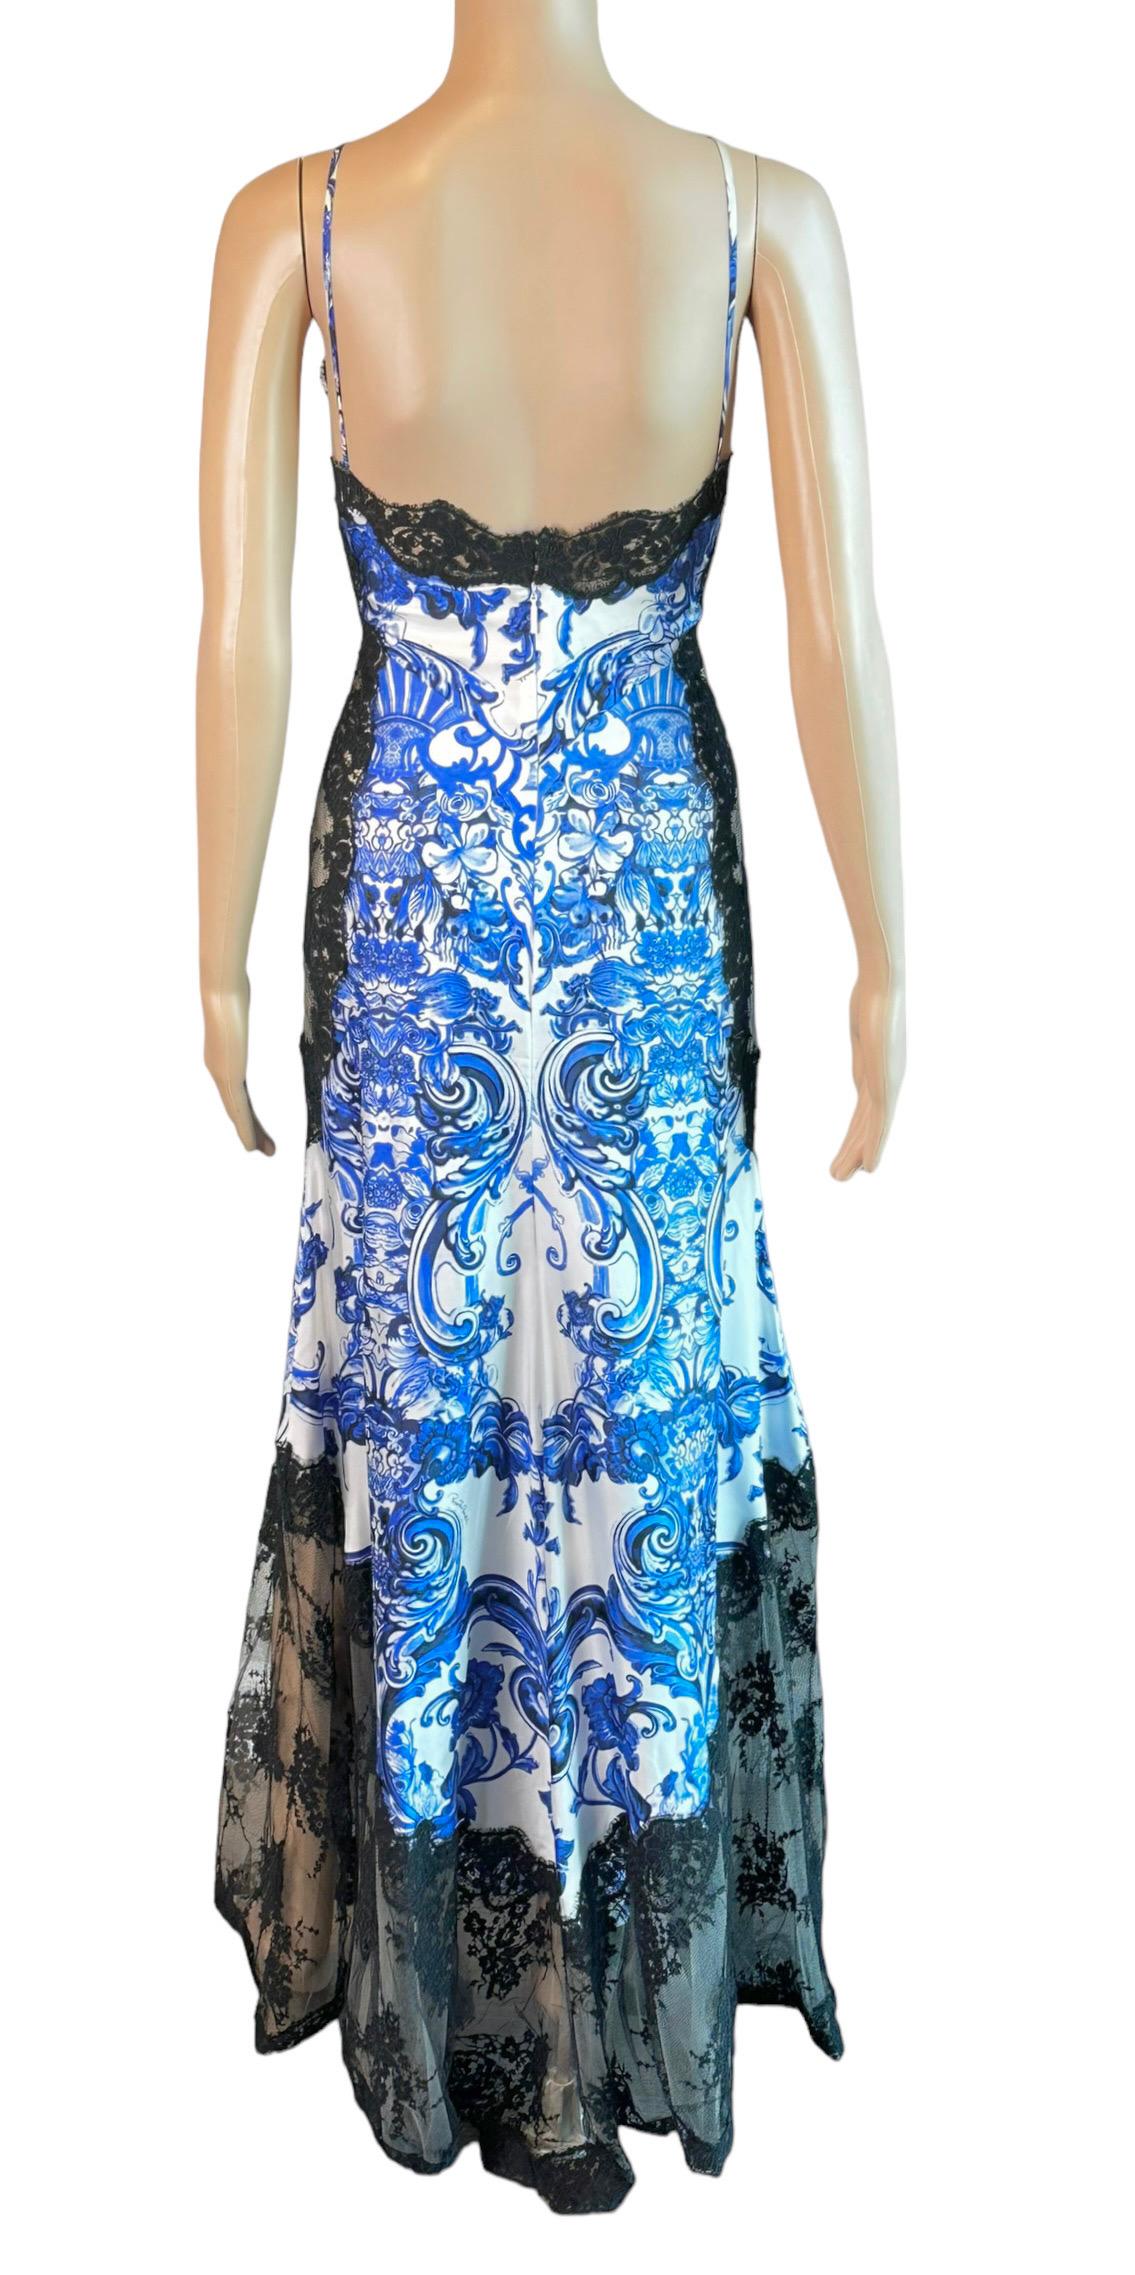 Roberto Cavalli Resort 2013 Chinoiserie Ming Porcelain Sheer Lace Evening Dress For Sale 4